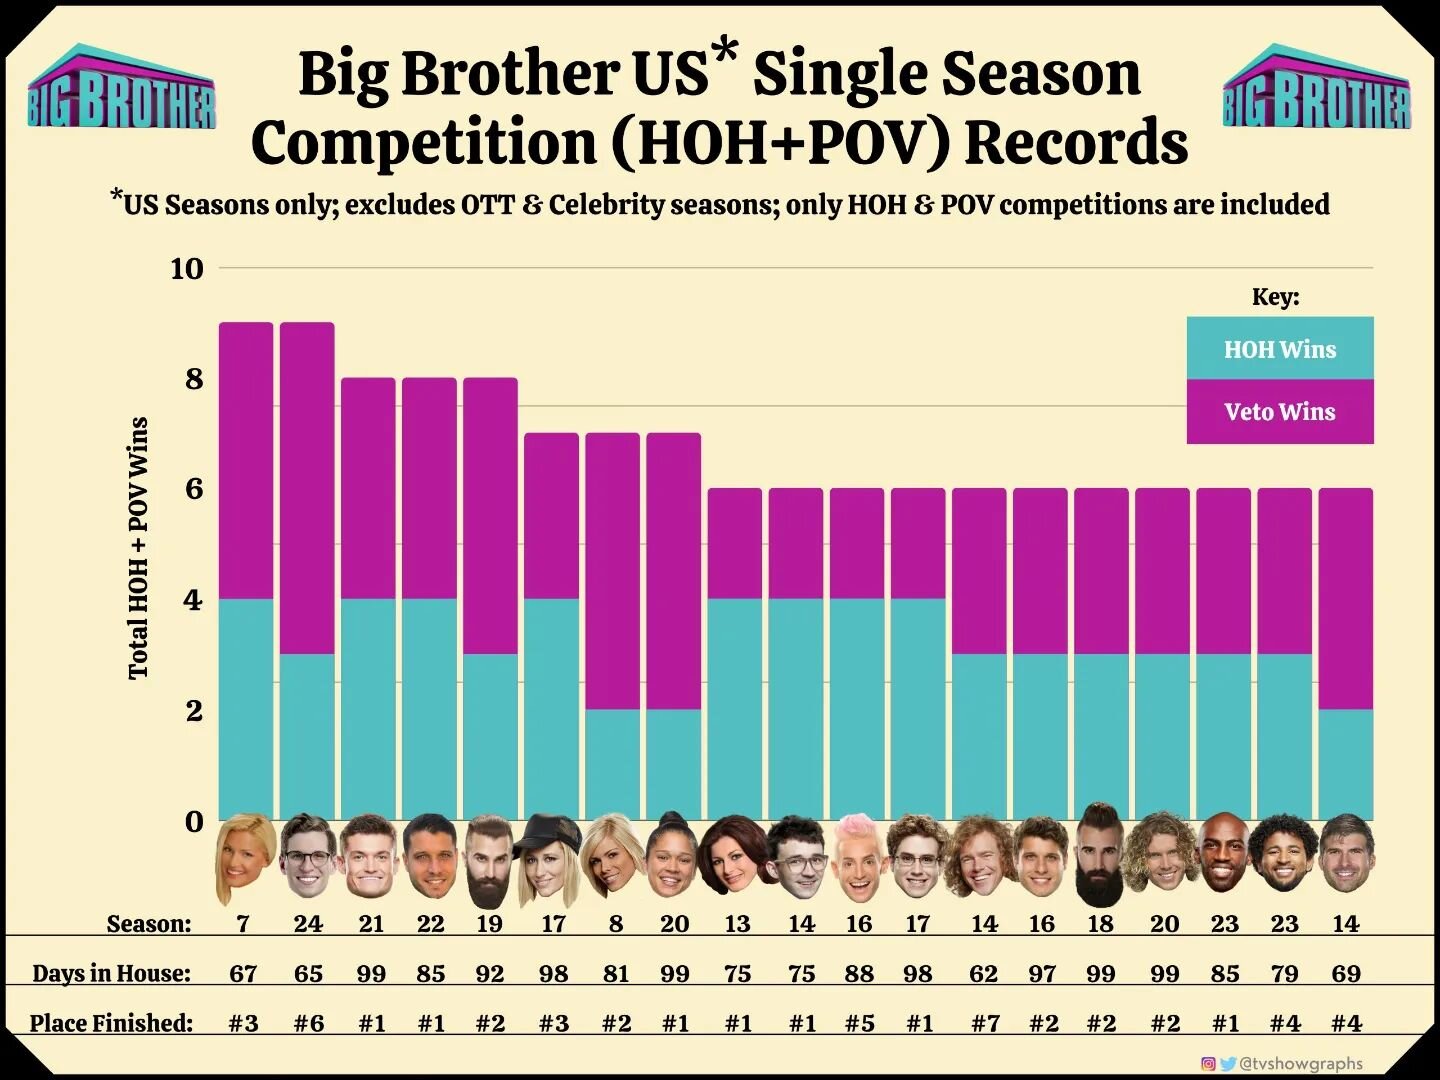 With this summer of Big Brother (US) over, it was time to take a look at the (newly updated) single season competition records (HOH + Veto) across the show's history. Michael from #BB24 impressively ended up tying the single season competition win re